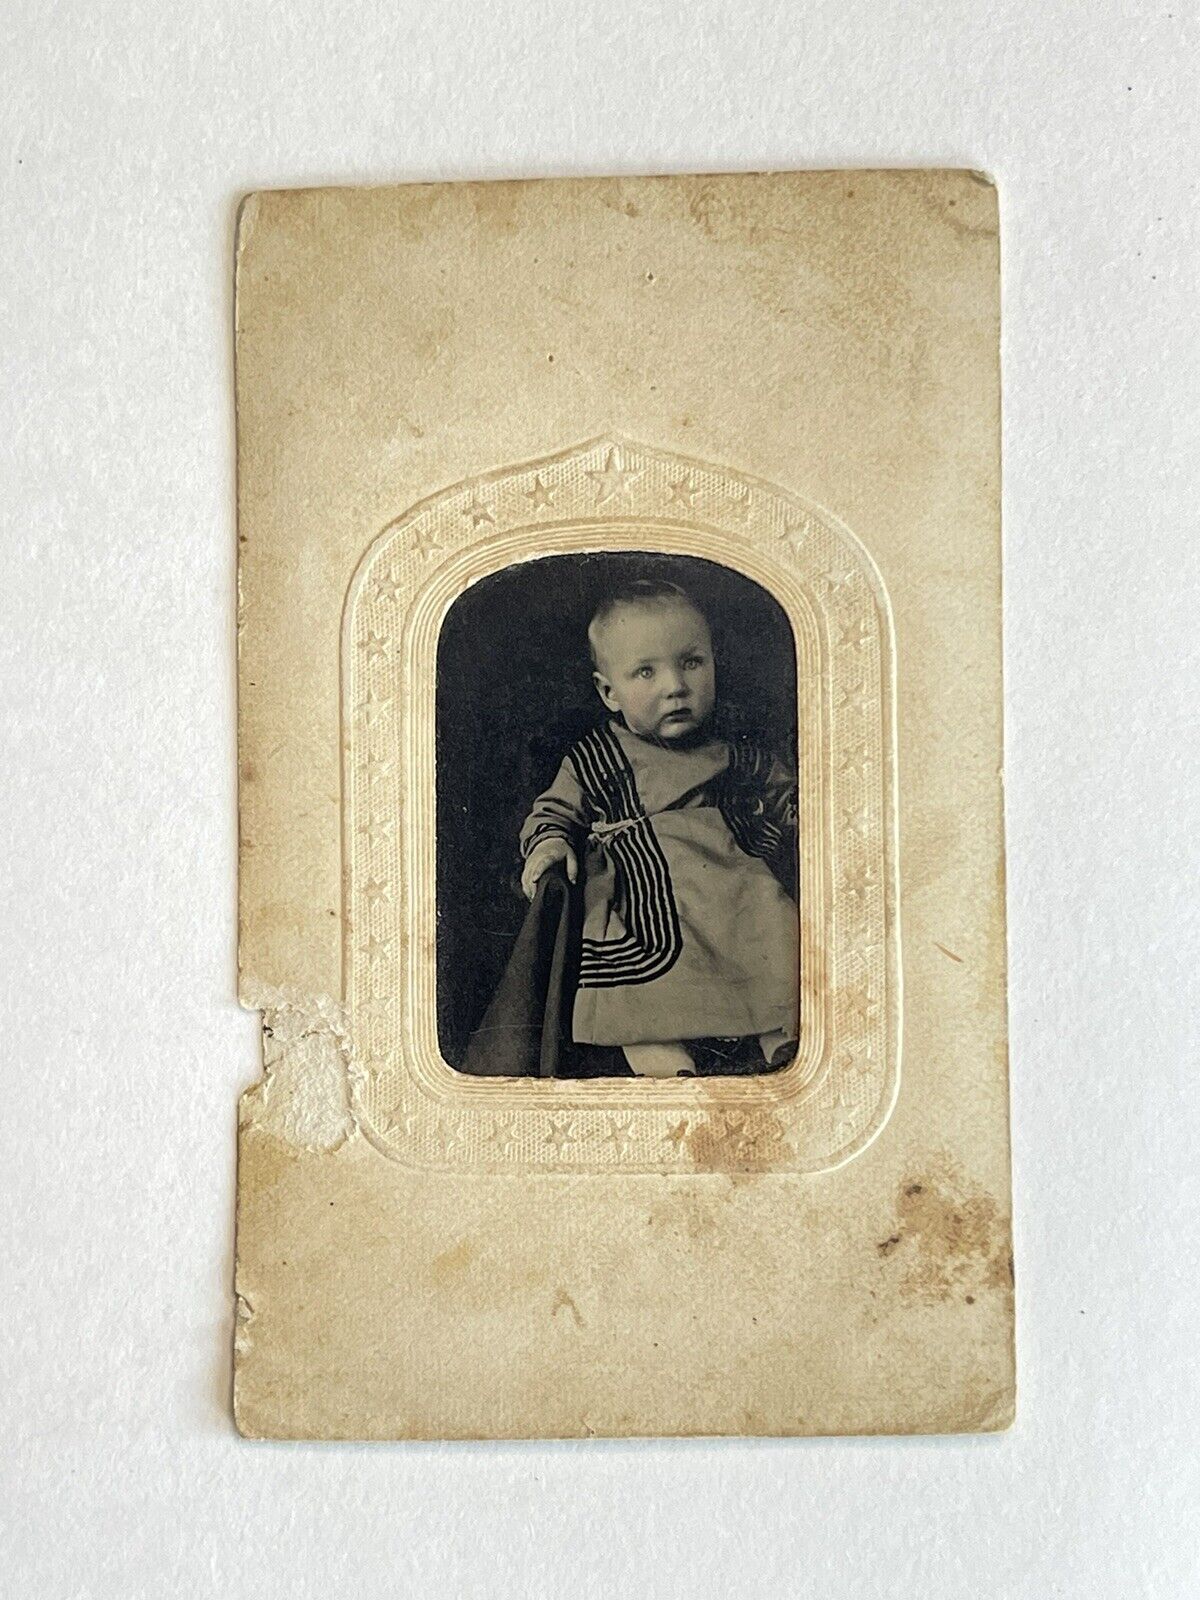 Antique Victorian Old Tintype Photo Adorable Cute Child Girl Or Boy Tin Type